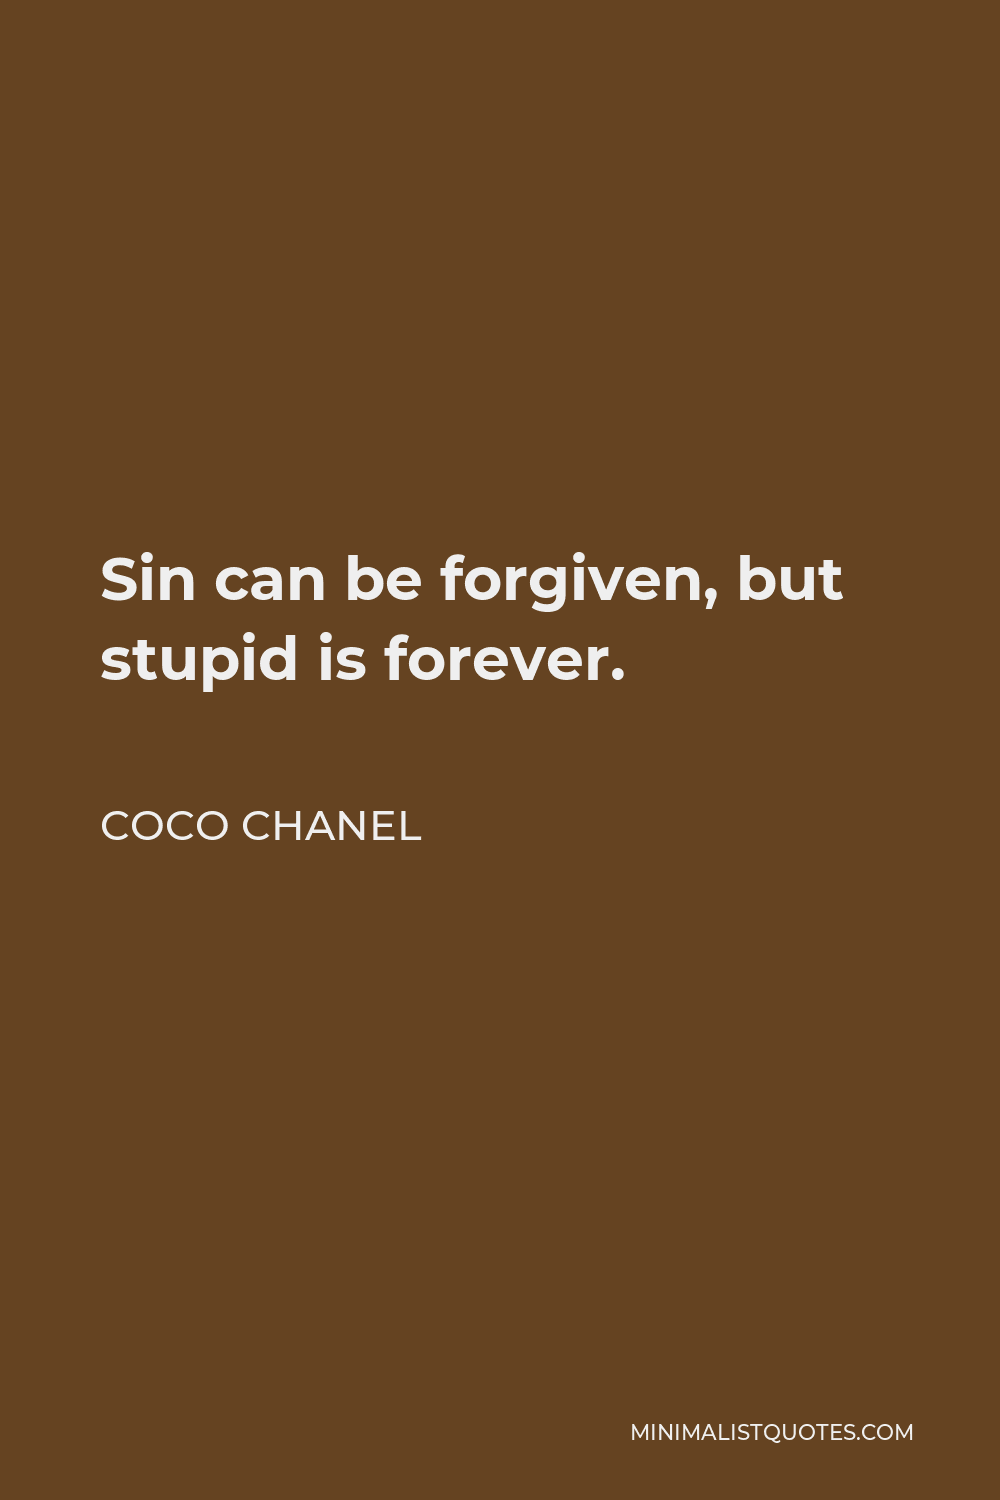 Coco Chanel Quote - Sin can be forgiven, but stupid is forever.